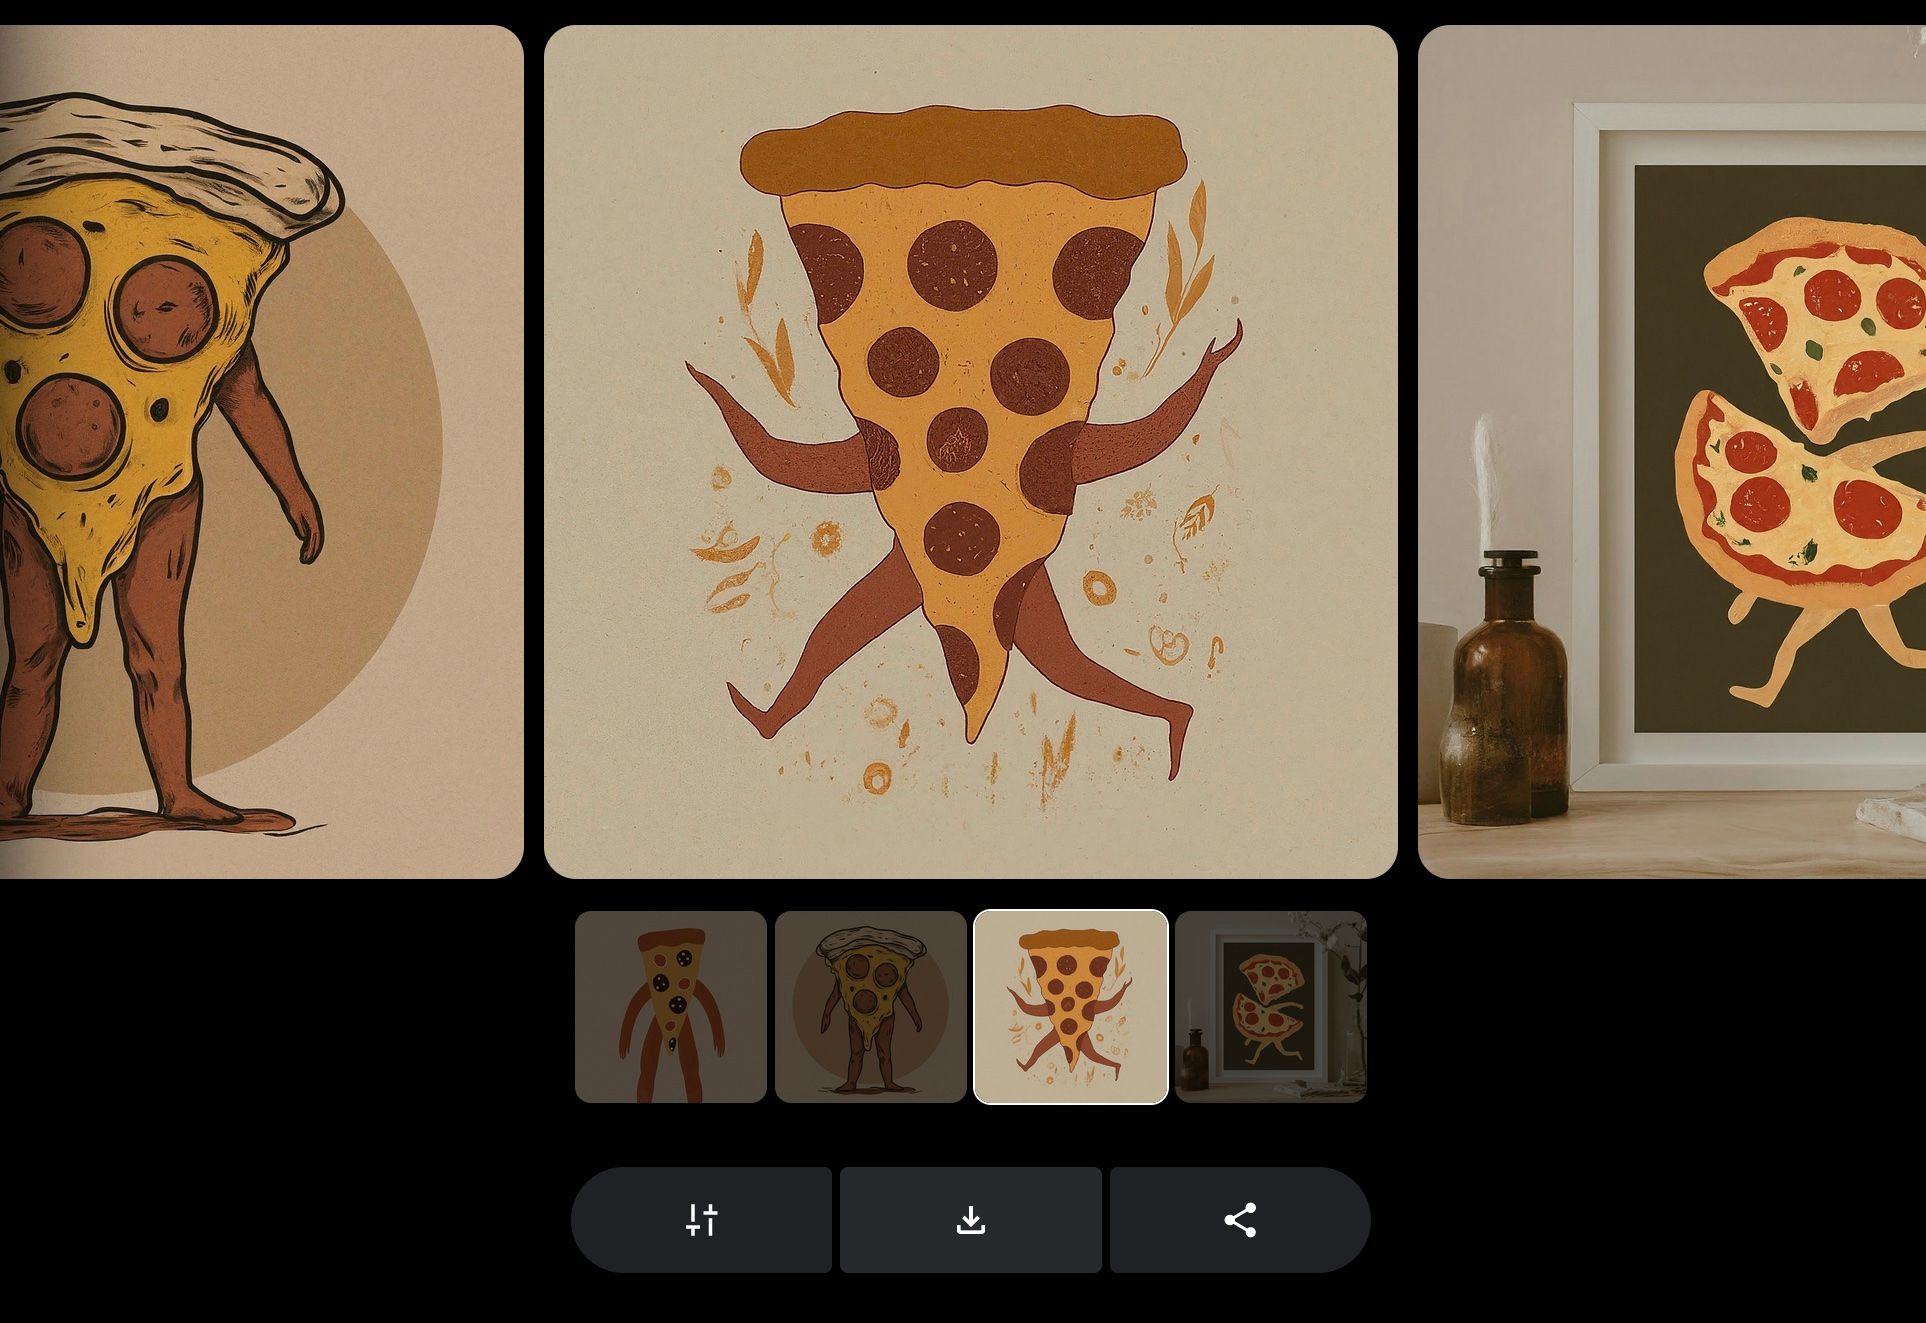 Images of pizza in ImageFX above the download button